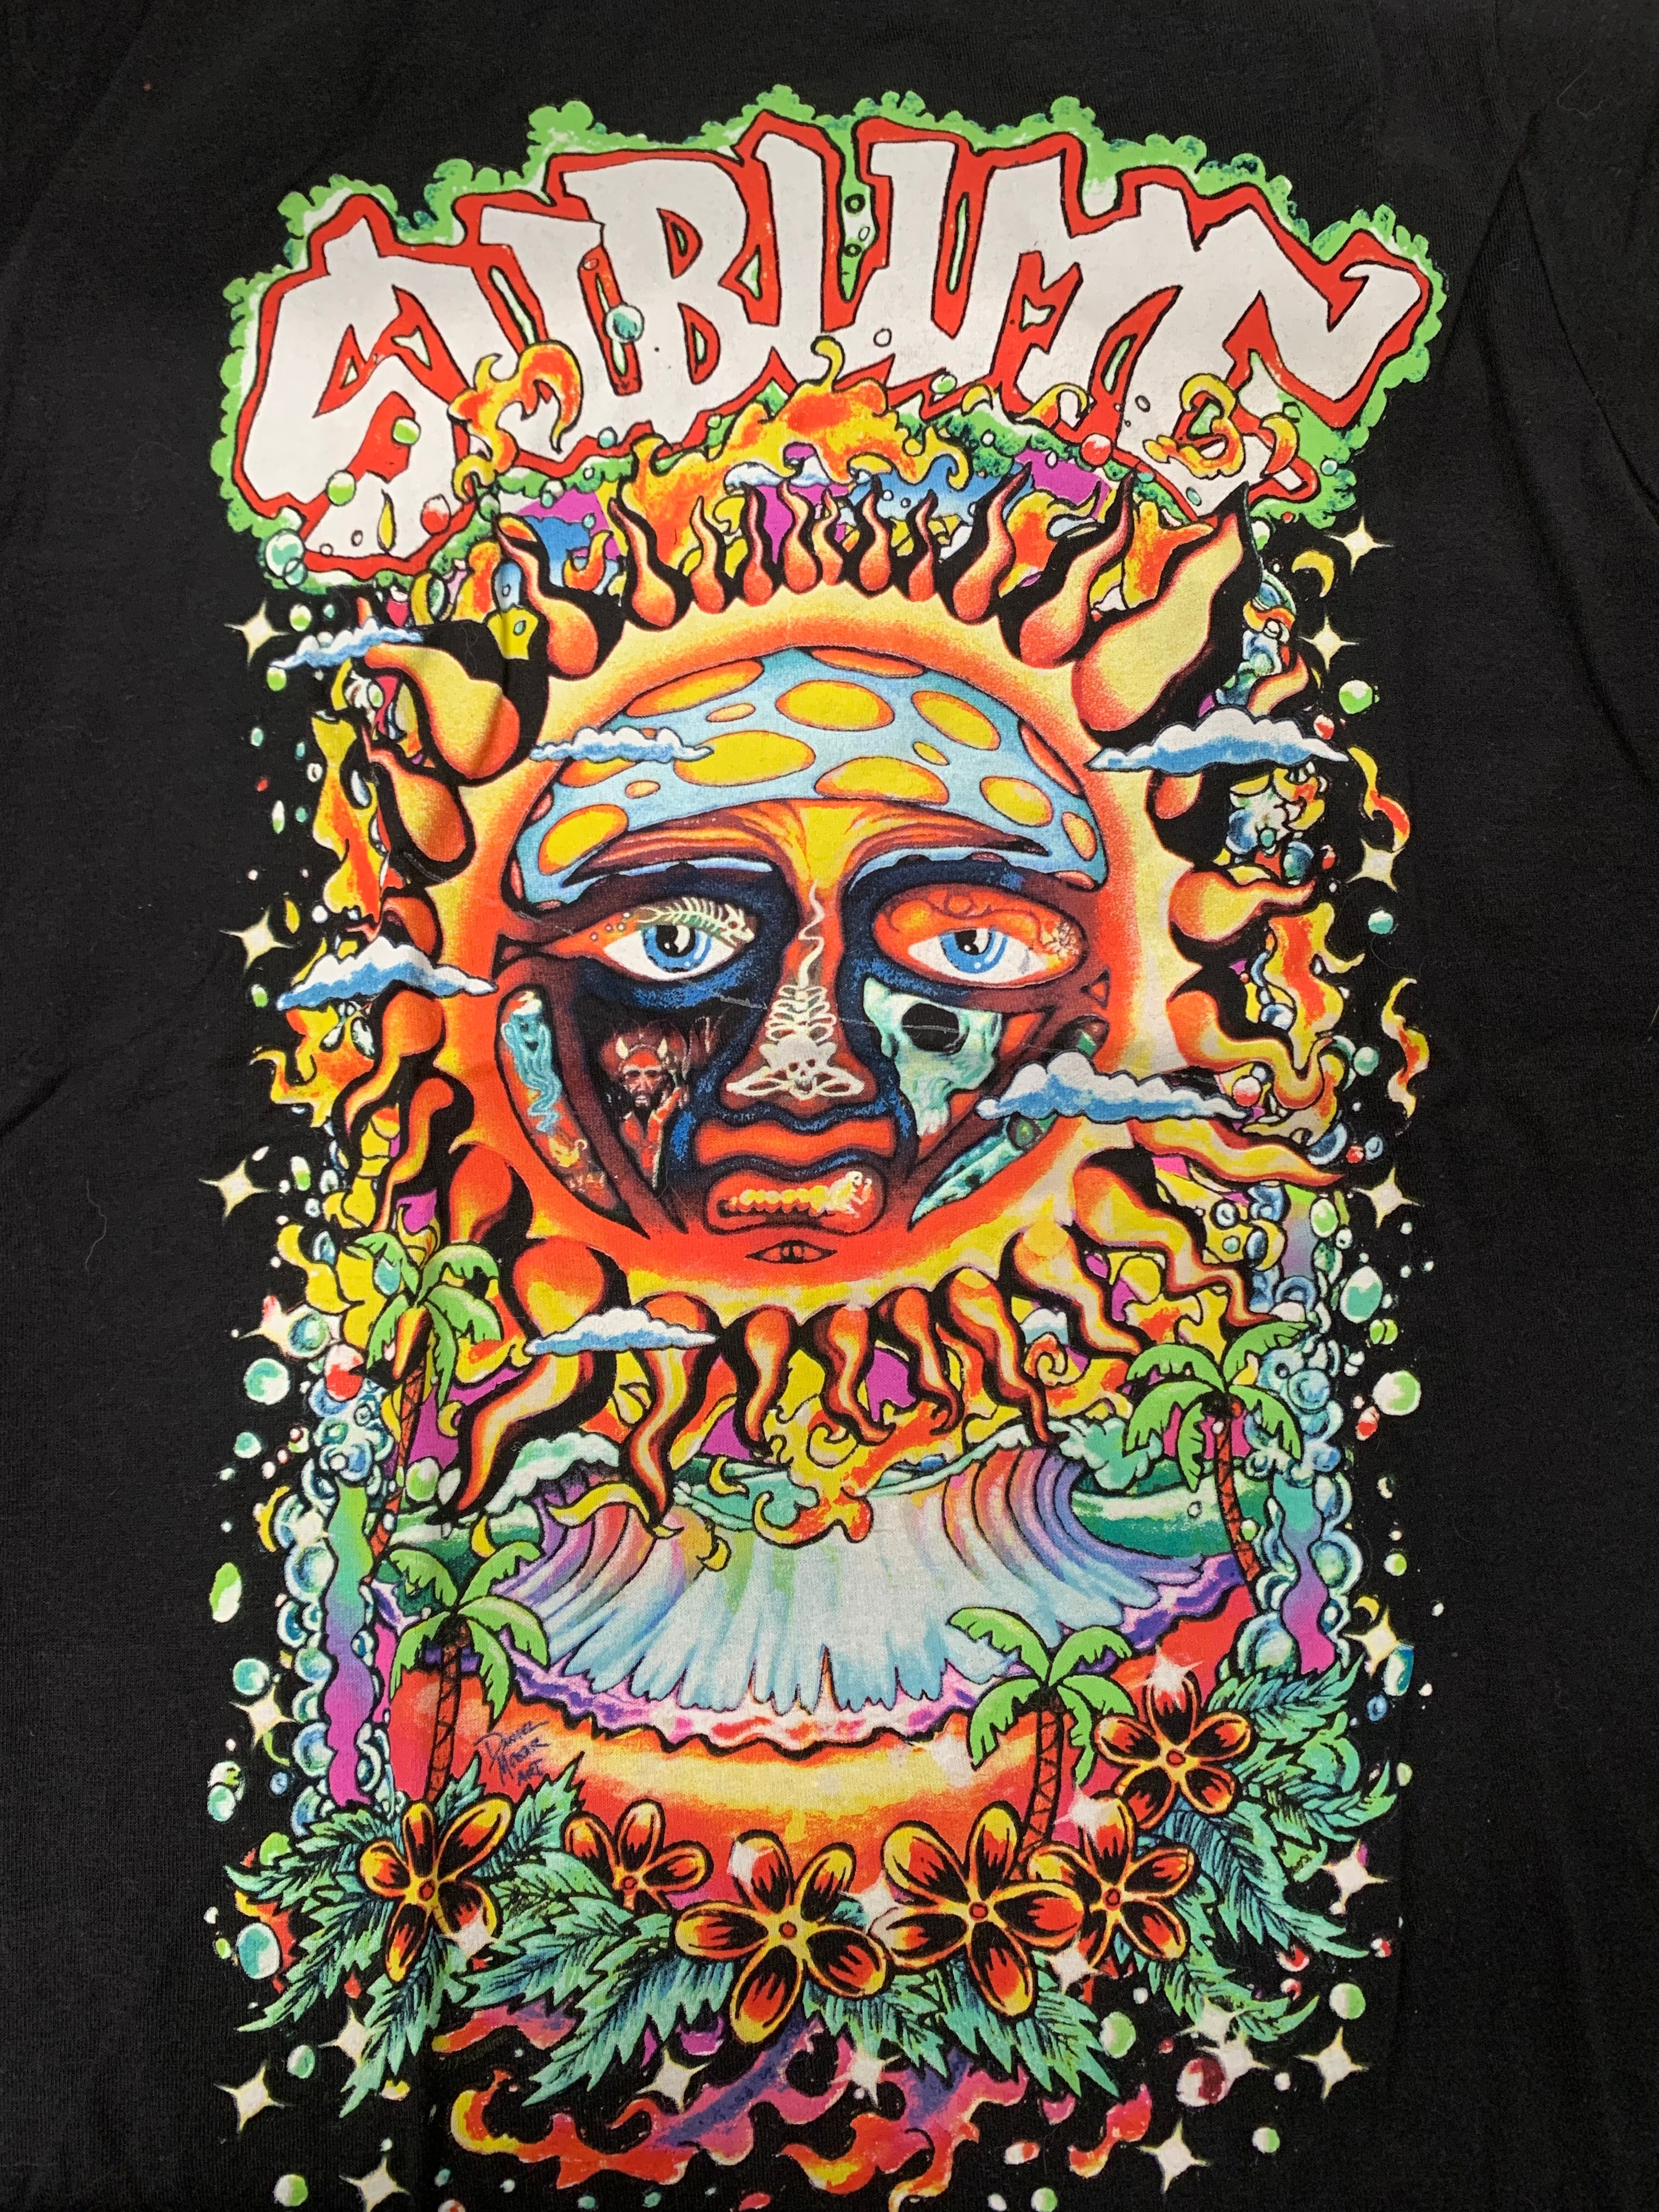 Sublime 40 Oz Of Freedom Psychedelic T-Shirt, Black, S